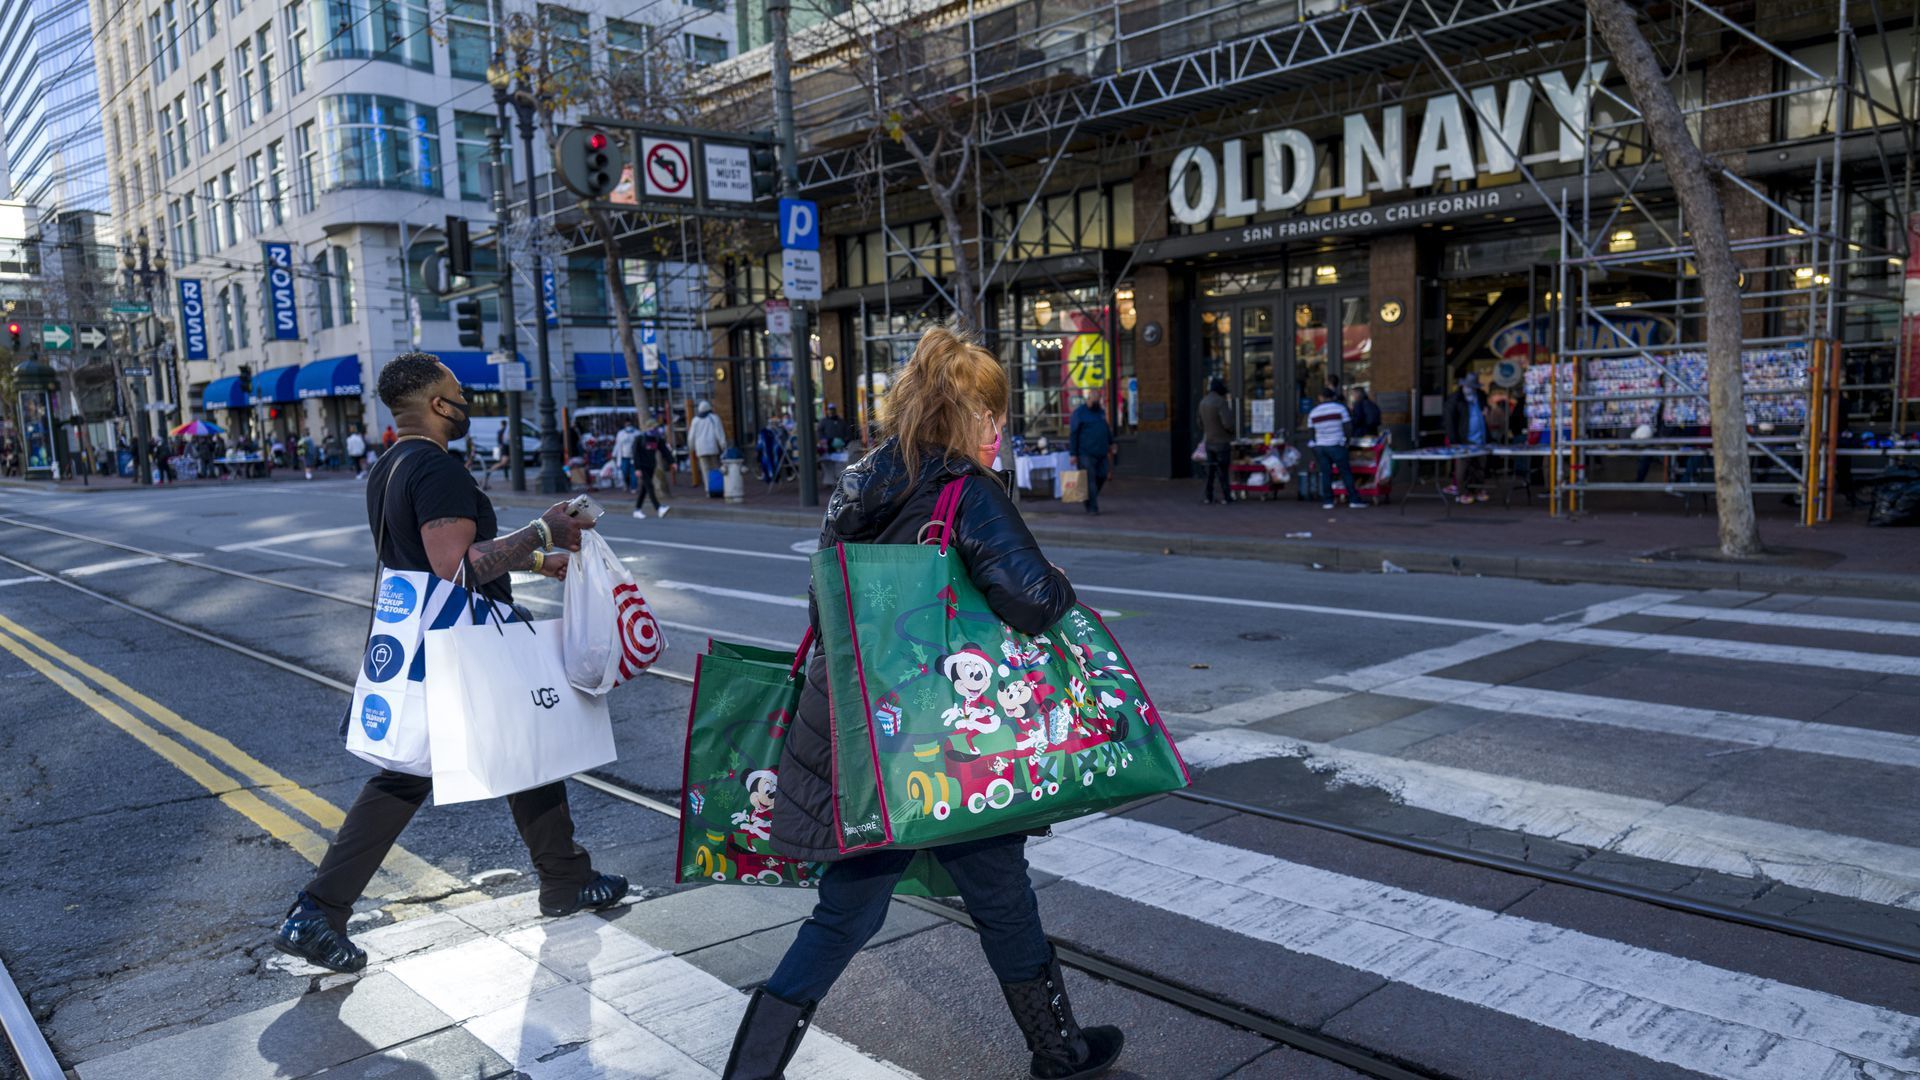 Picture of two people holding shopping bags walking towards an Old Navy